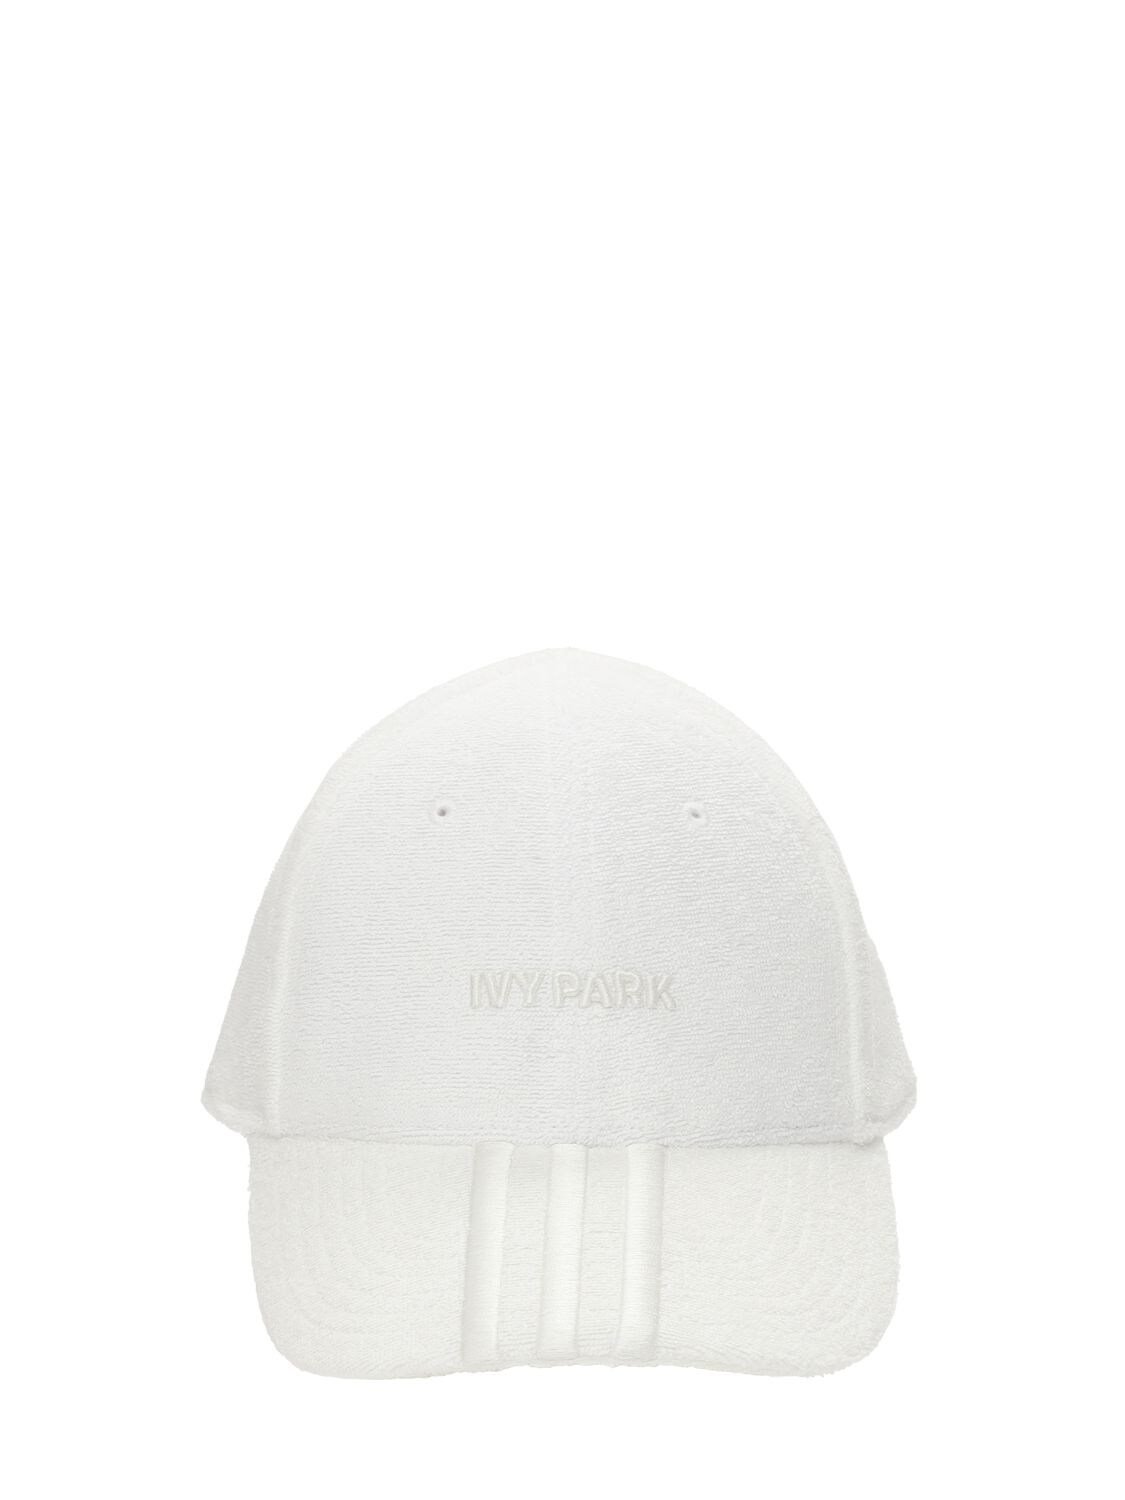 Adidas X Ivy Park Towel Terry Backless Cap In White